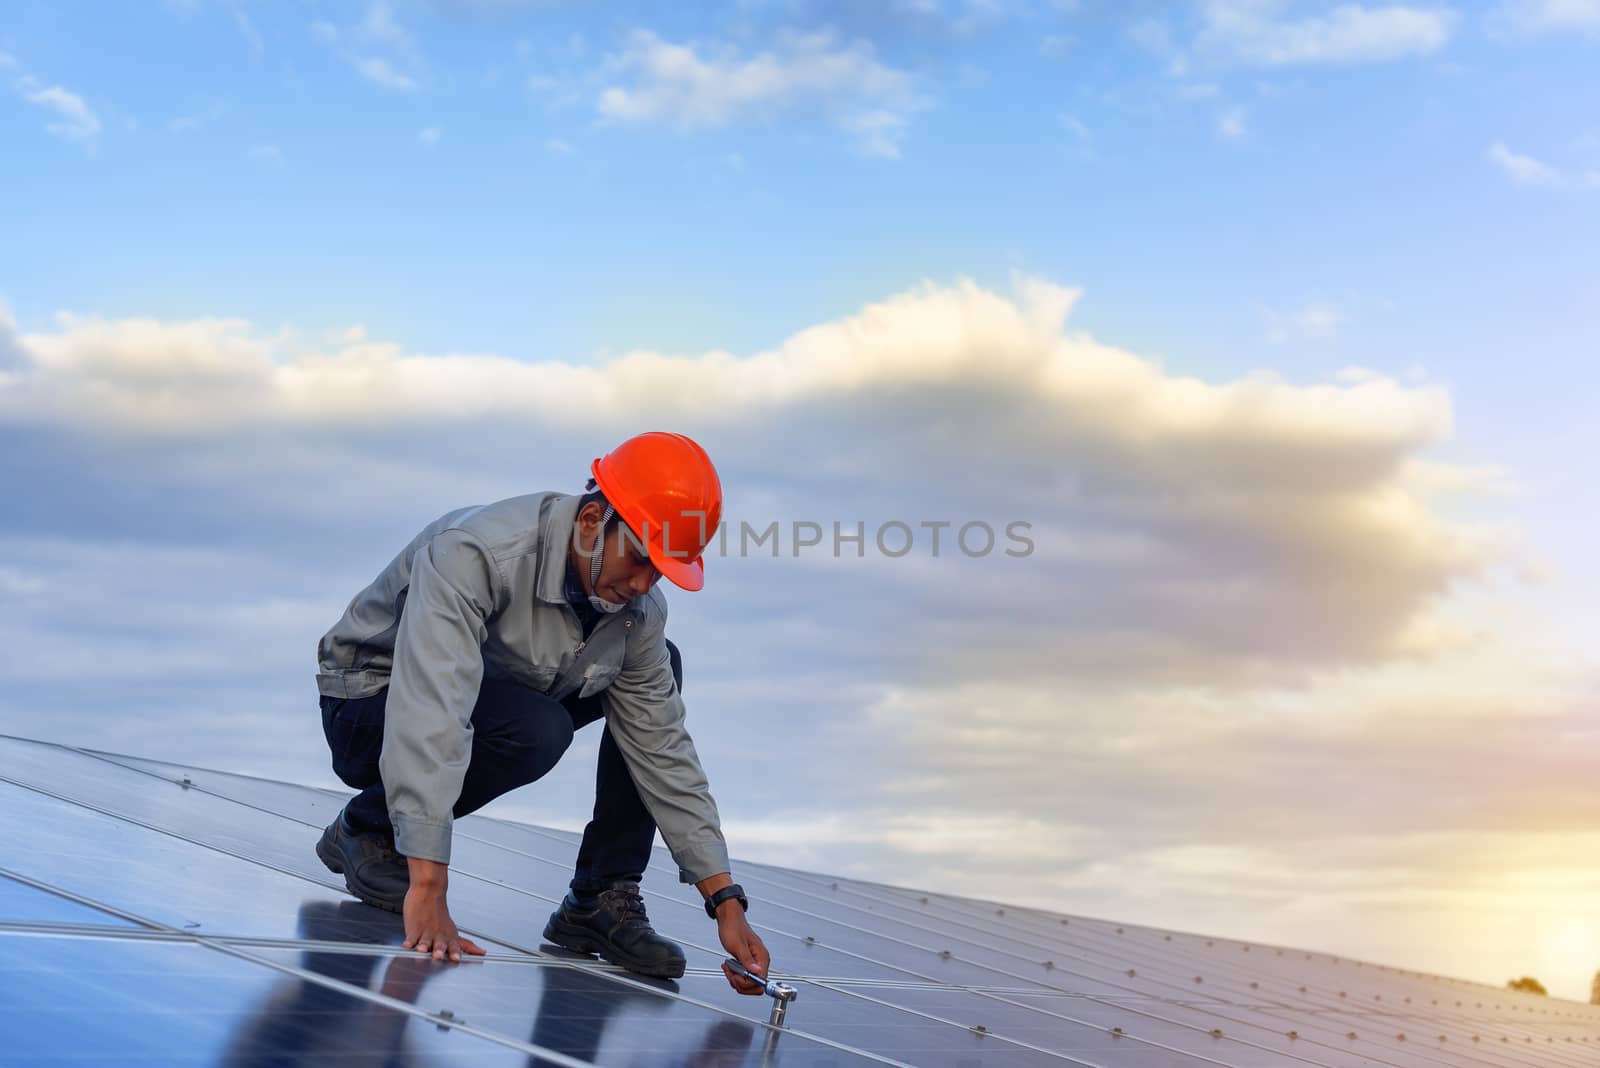 The young man is repairing the solar panel at the station.